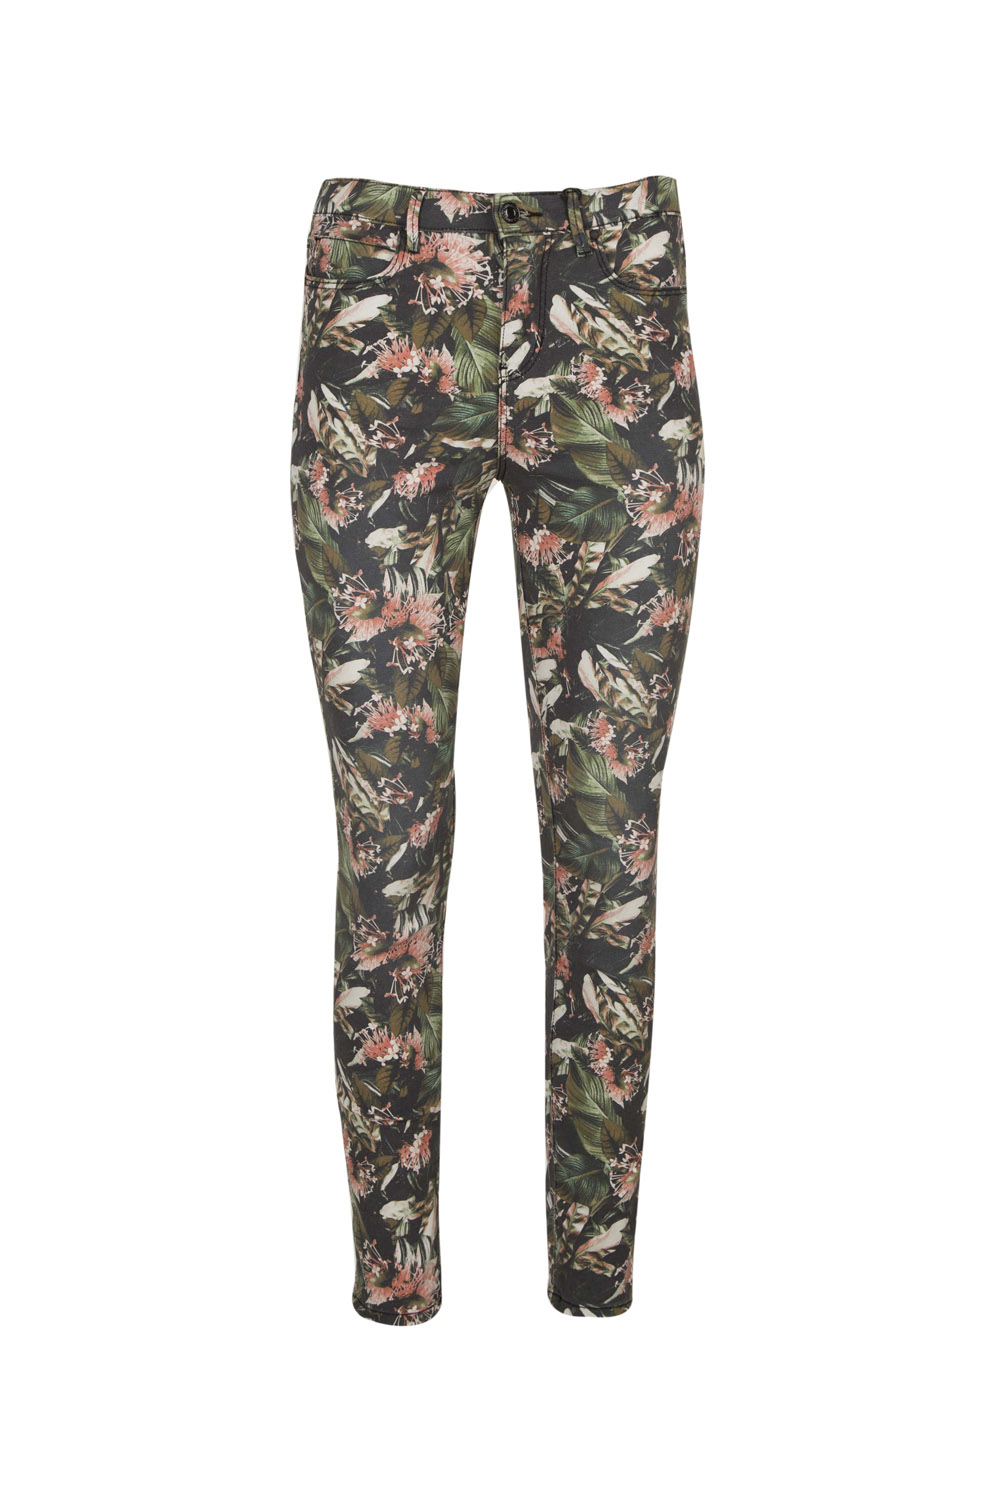 Tropic Patterned Jeans